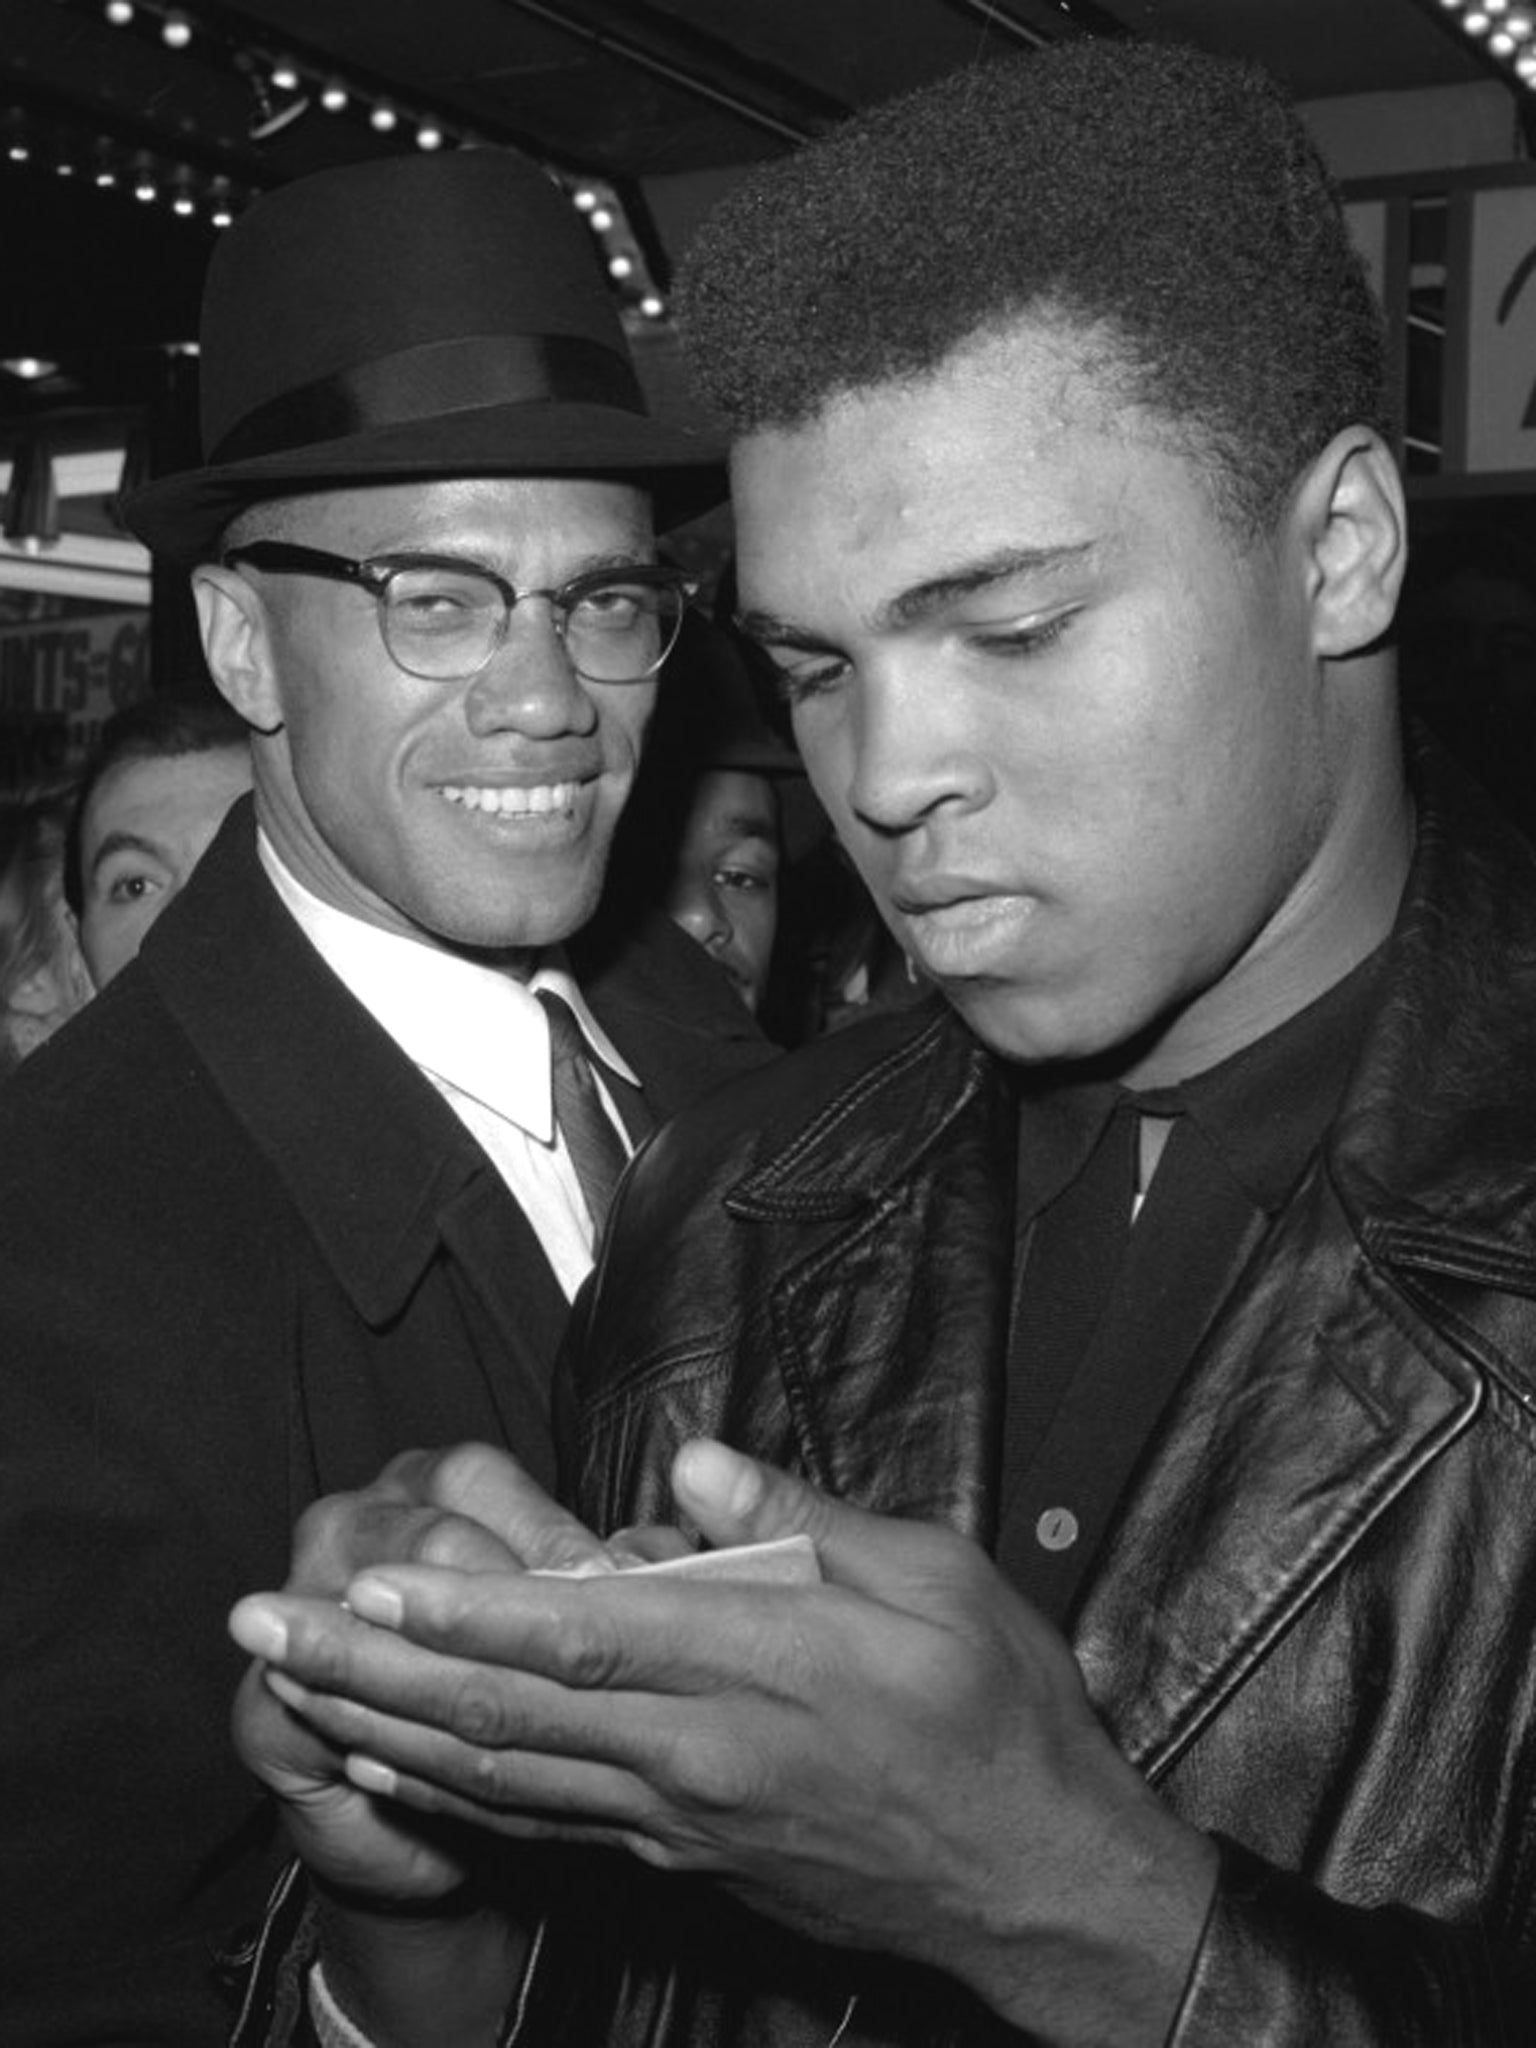 Muhammad Ali S One Regret Turning His Back On Malcolm X The - before the rift malcolm x and muhammad ali in ma!   rch 1964